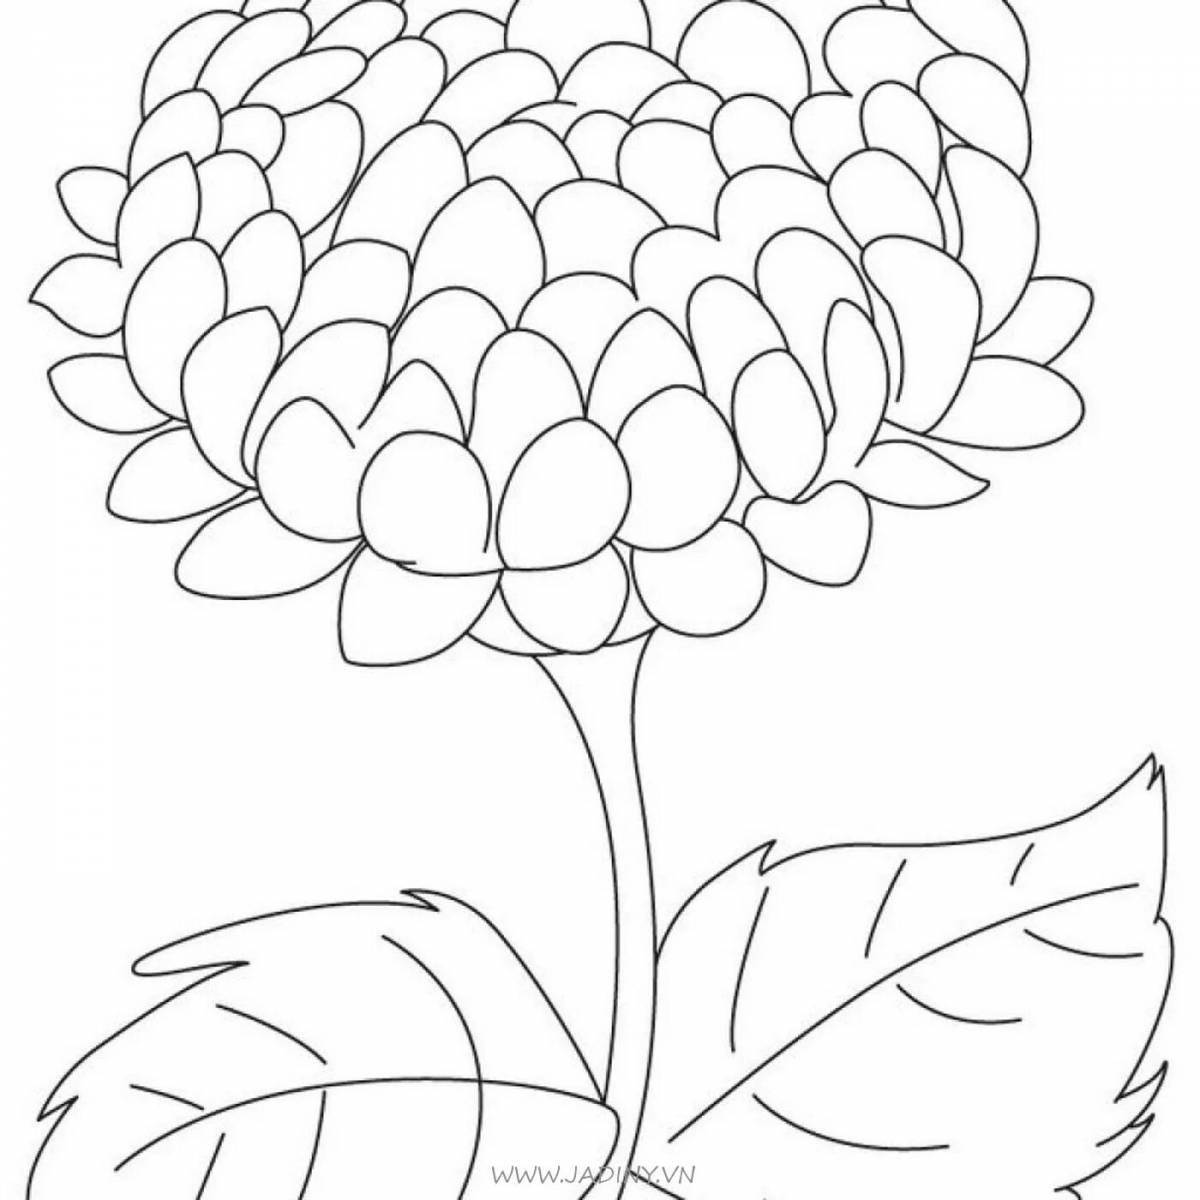 Animated asters coloring page for kids